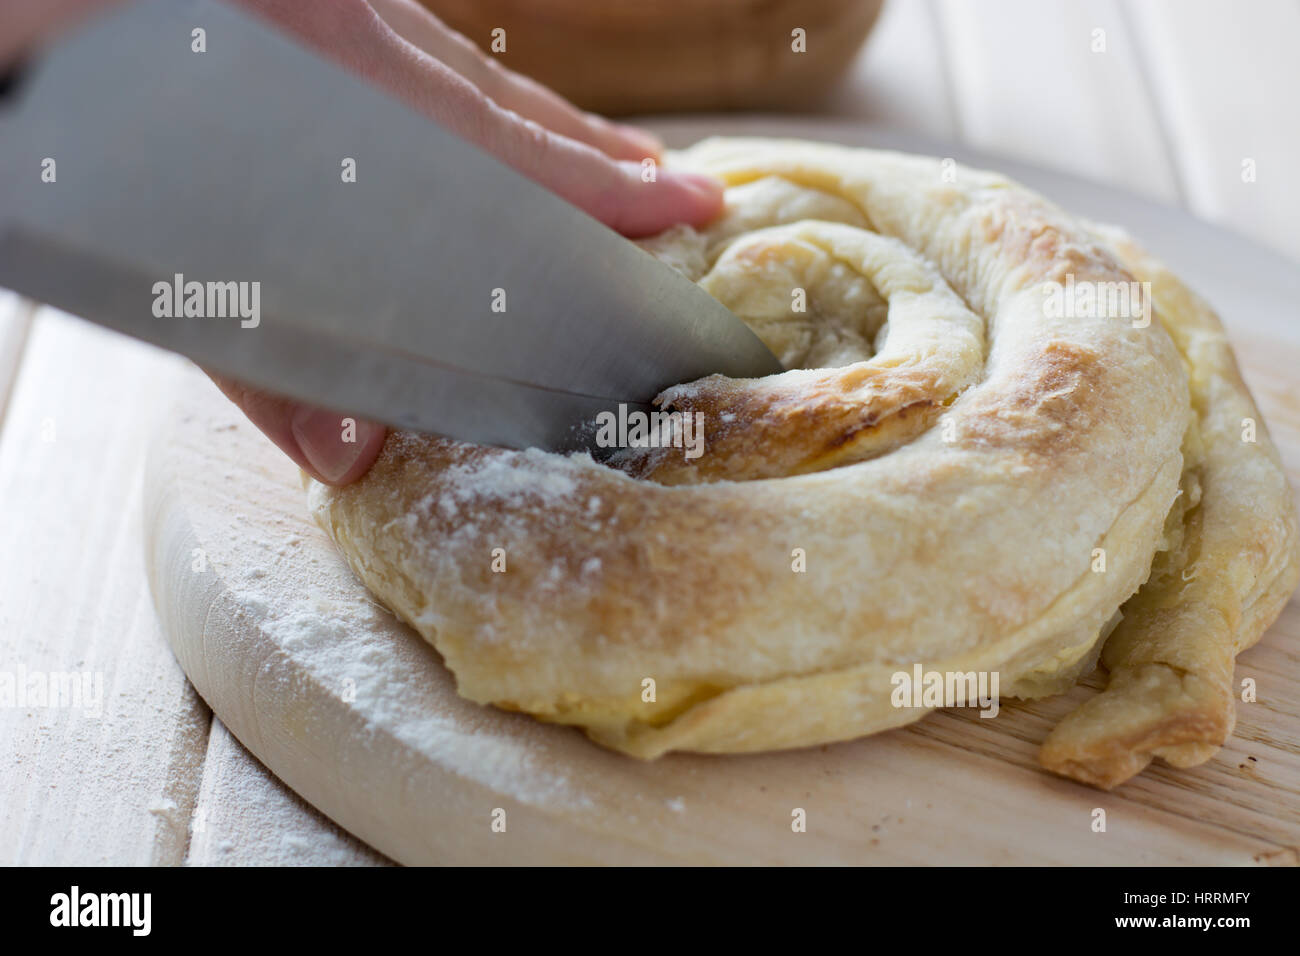 Female hands cutting freshly baked cheese pie on the wooden plate Stock Photo